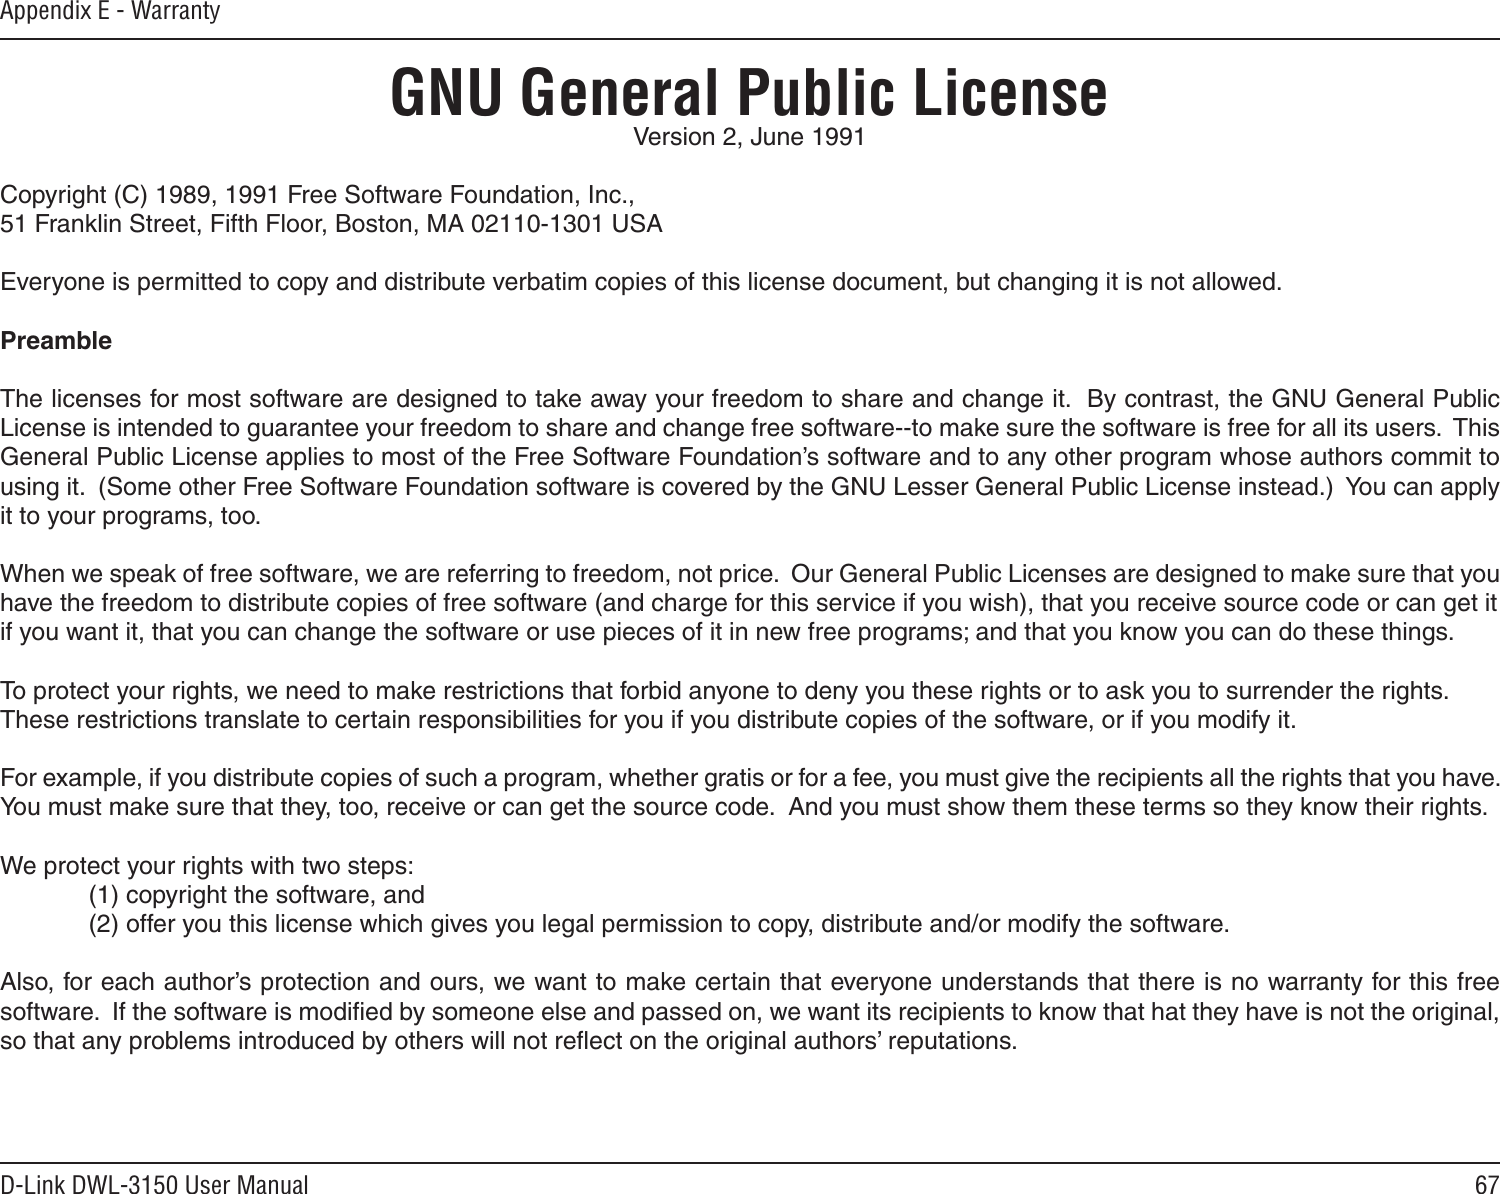 67D-Link DWL-3150 User ManualAppendix E - WarrantyGNU General Public LicenseVersion 2, June 1991Copyright (C) 1989, 1991 Free Software Foundation, Inc.,51 Franklin Street, Fifth Floor, Boston, MA 02110-1301 USAEveryone is permitted to copy and distribute verbatim copies of this license document, but changing it is not allowed.PreambleThe licenses for most software are designed to take away your freedom to share and change it.  By contrast, the GNU General Public License is intended to guarantee your freedom to share and change free software--to make sure the software is free for all its users.  This General Public License applies to most of the Free Software Foundation’s software and to any other program whose authors commit to using it.  (Some other Free Software Foundation software is covered by the GNU Lesser General Public License instead.)  You can apply it to your programs, too.When we speak of free software, we are referring to freedom, not price.  Our General Public Licenses are designed to make sure that you have the freedom to distribute copies of free software (and charge for this service if you wish), that you receive source code or can get itif you want it, that you can change the software or use pieces of it in new free programs; and that you know you can do these things.To protect your rights, we need to make restrictions that forbid anyone to deny you these rights or to ask you to surrender the rights.These restrictions translate to certain responsibilities for you if you distribute copies of the software, or if you modify it.For example, if you distribute copies of such a program, whether gratis or for a fee, you must give the recipients all the rights that you have.  You must make sure that they, too, receive or can get the source code.  And you must show them these terms so they know their rights.We protect your rights with two steps: (1) copyright the software, and(2) offer you this license which gives you legal permission to copy, distribute and/or modify the software.Also, for each author’s protection and ours, we want to make certain that everyone understands that there is no warranty for this free software.  If the software is modiﬁed by someone else and passed on, we want its recipients to know that hat they have is not the original, so that any problems introduced by others will not reﬂect on the original authors’ reputations.